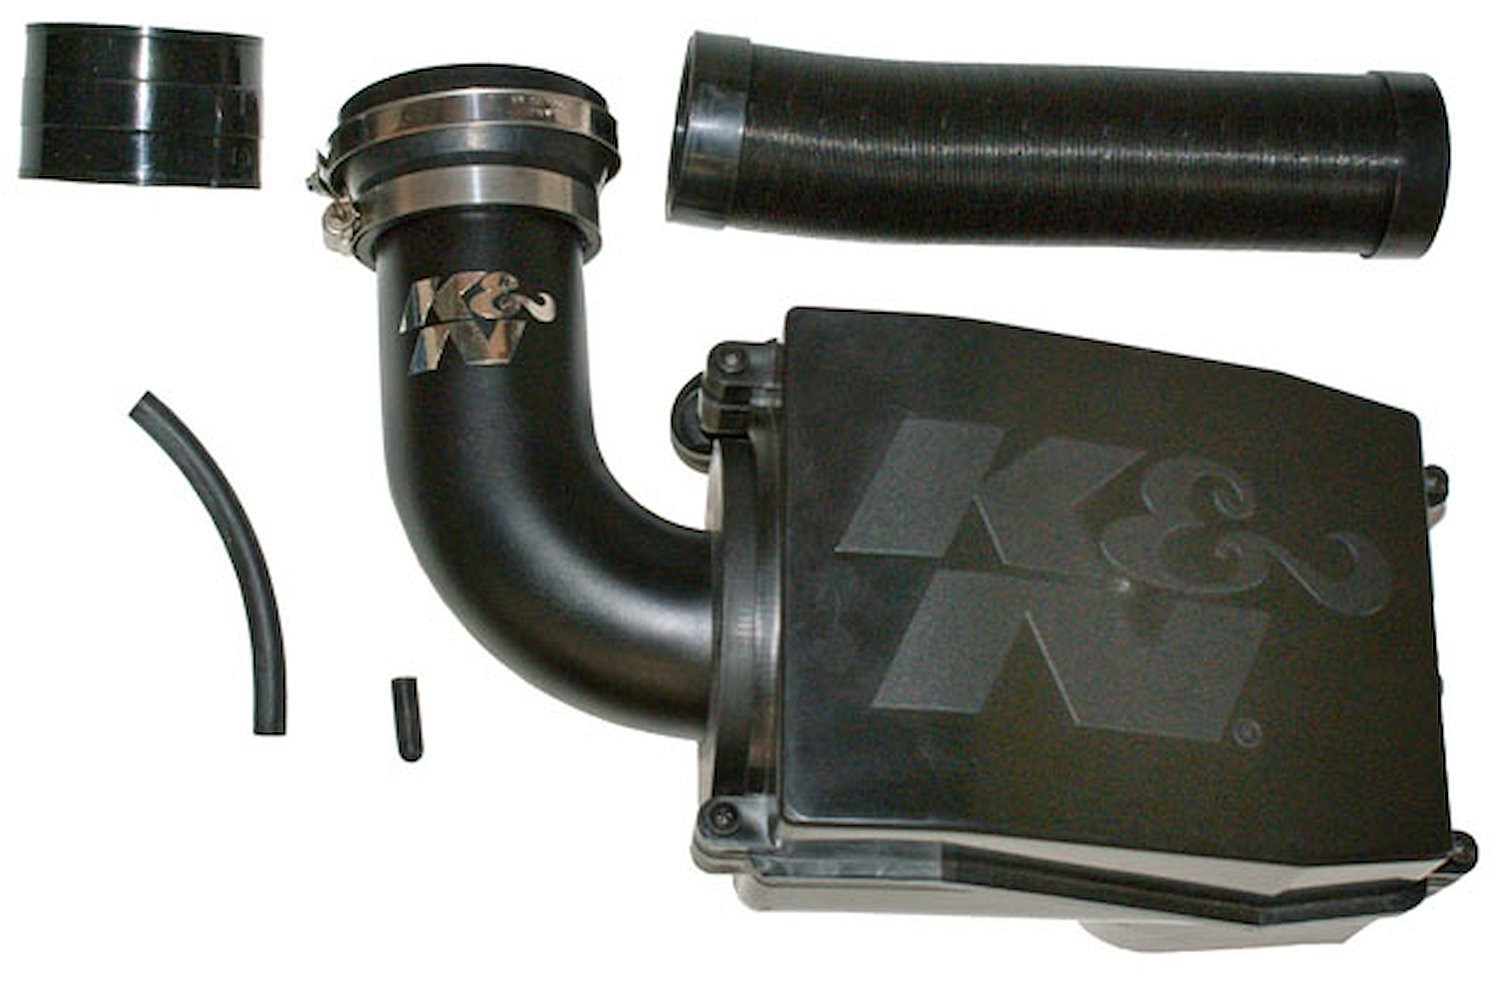 57S Series Performance Airbox